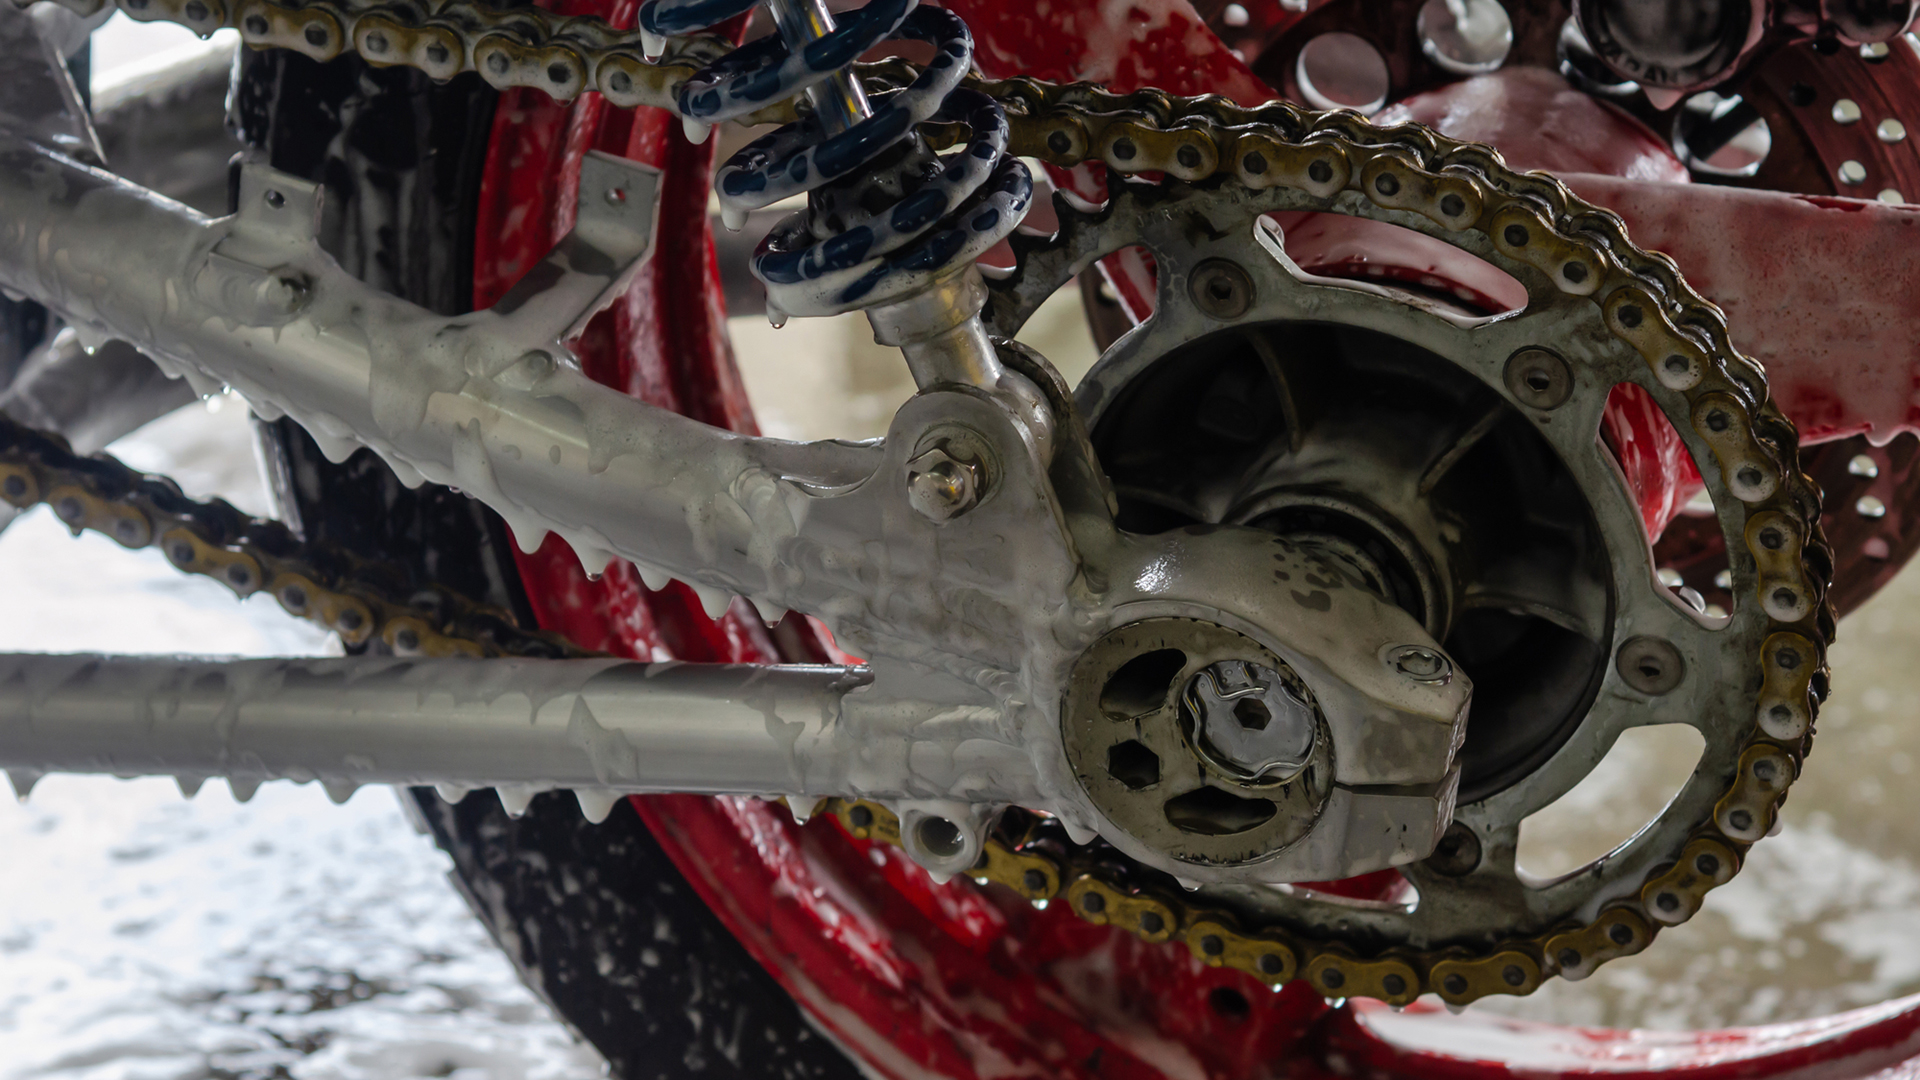 A motorcycle chain requires special attention, cleaning, and lubrication.